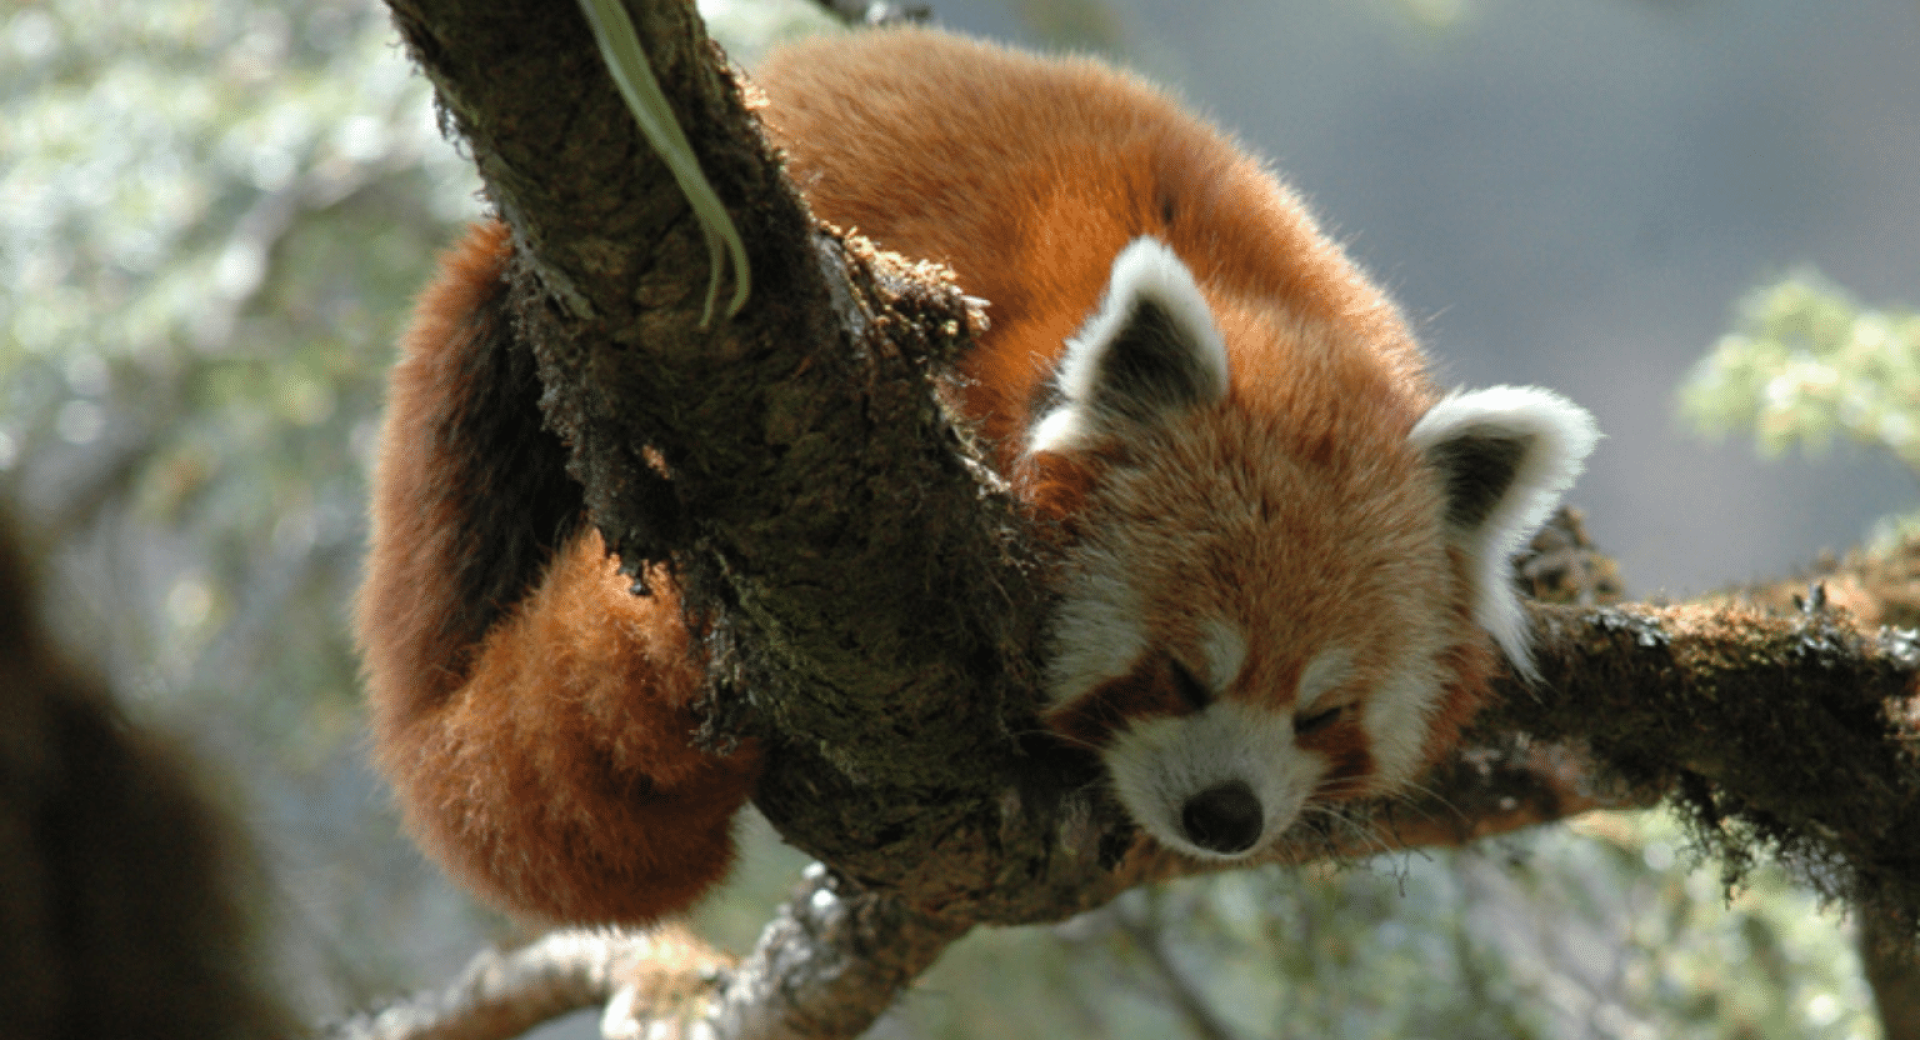 'Our Goal is Zero Panda Poaching': Q&A with Frontliners of our Campaign to Stop the Illegal Red Panda Trade